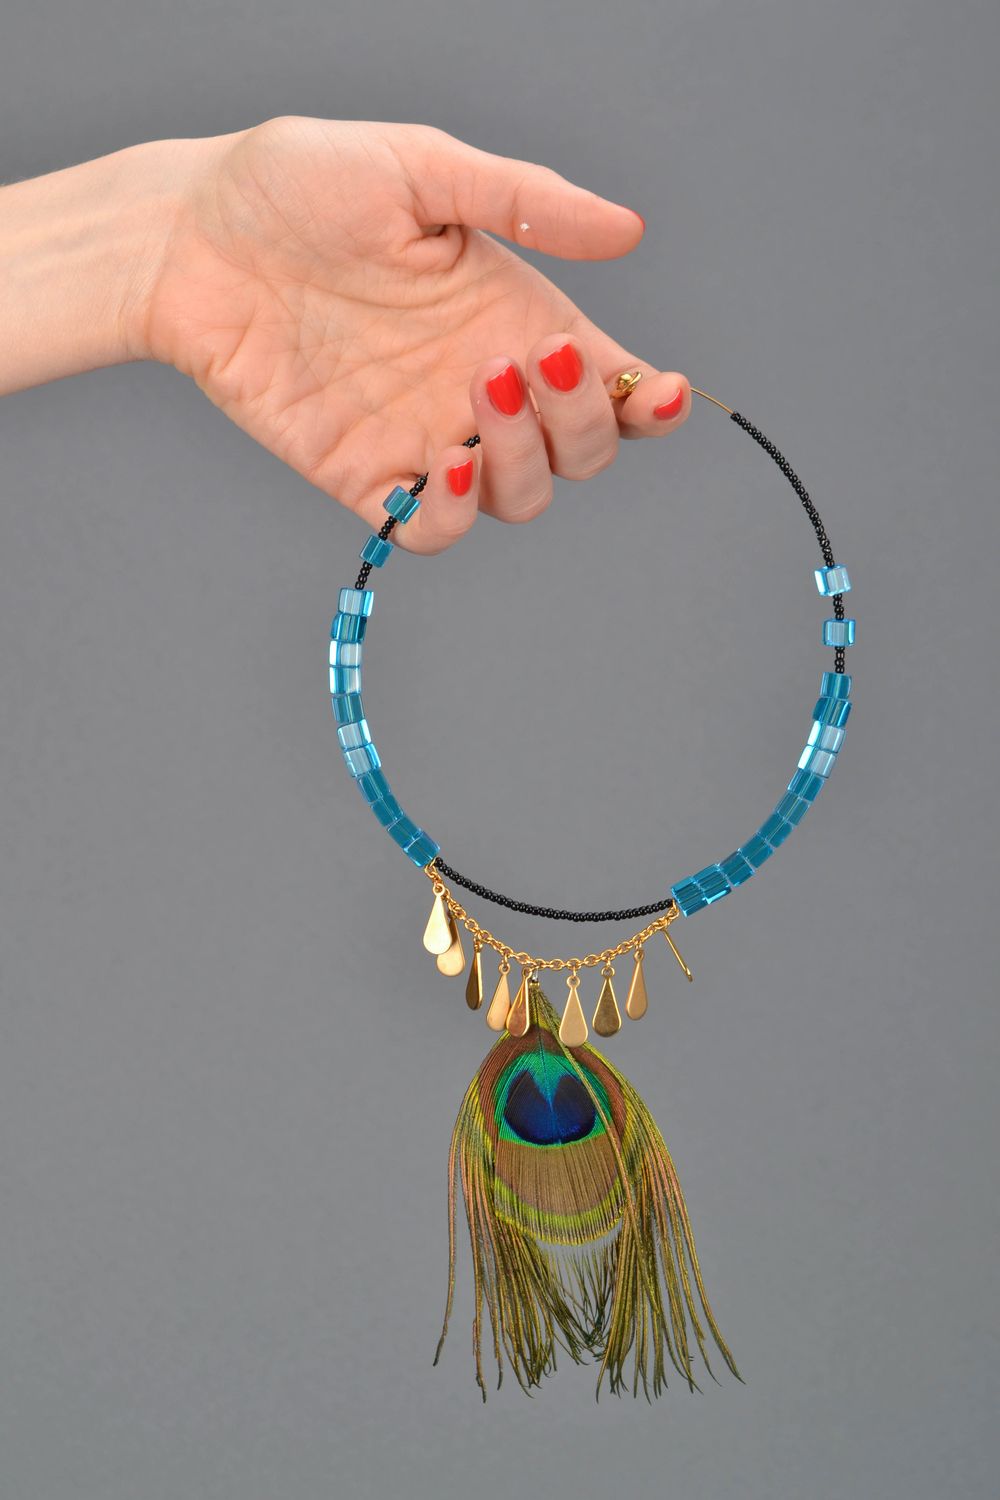 Handmade peacock feather necklace photo 2